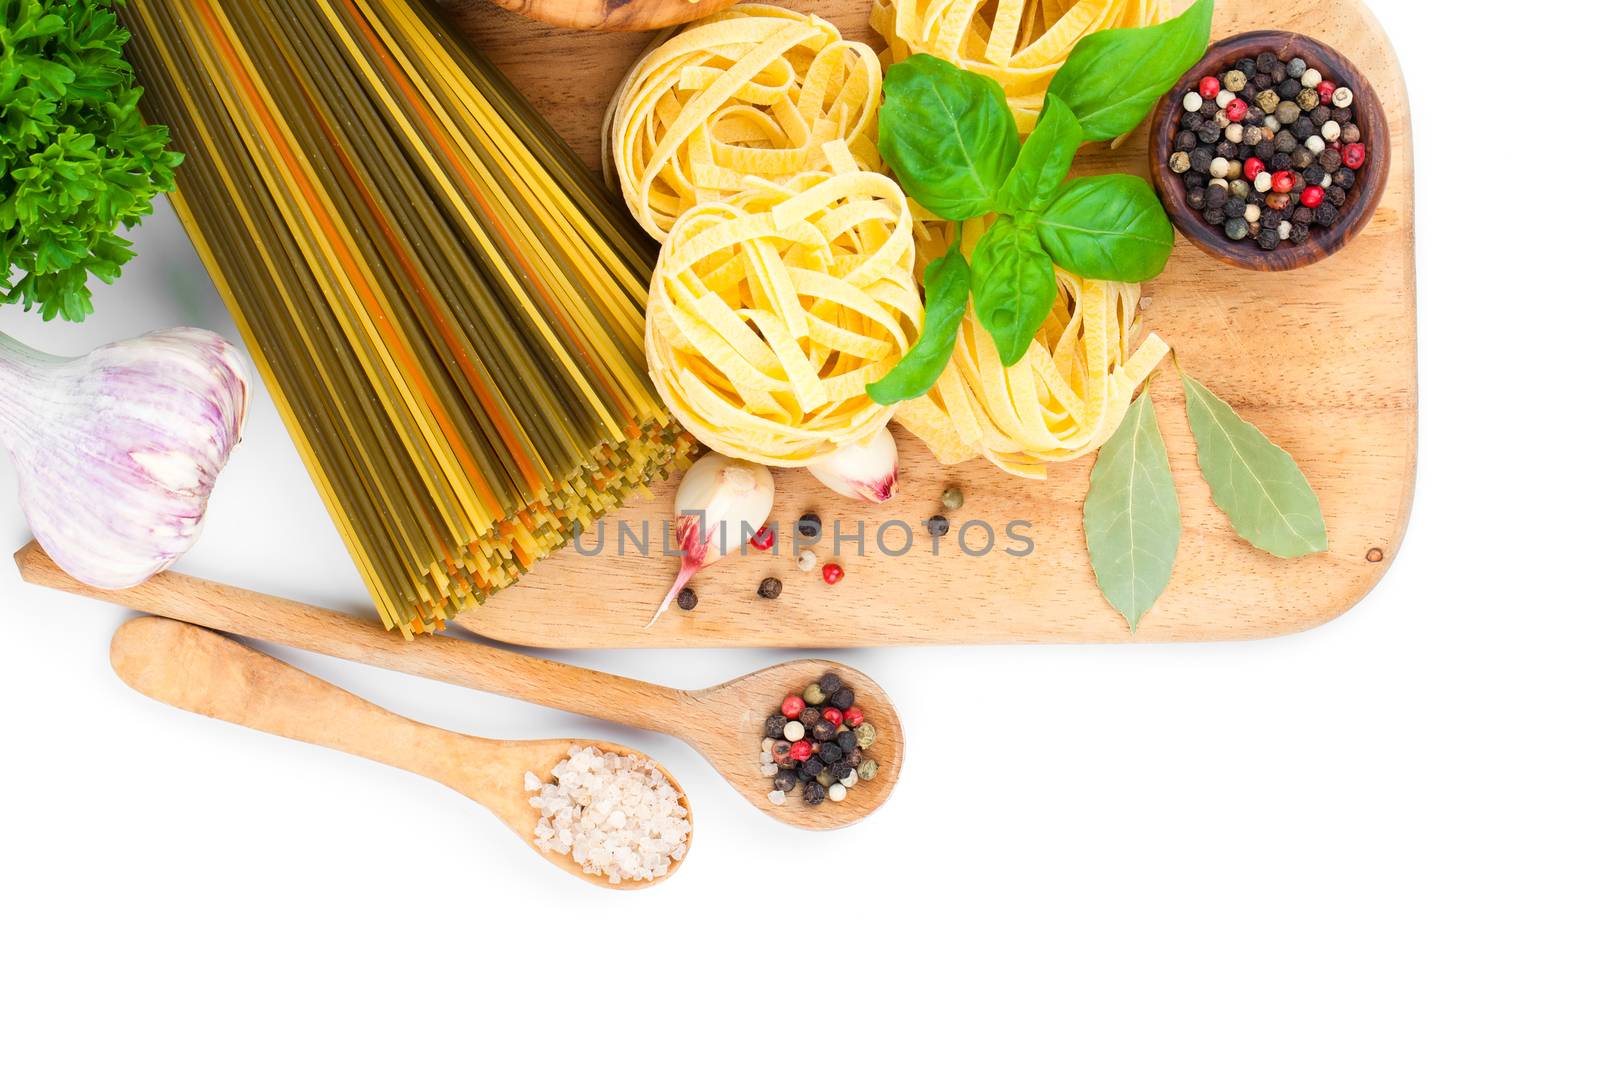 Fresh pasta and italian ingredients, isolated on white backgroun by motorolka